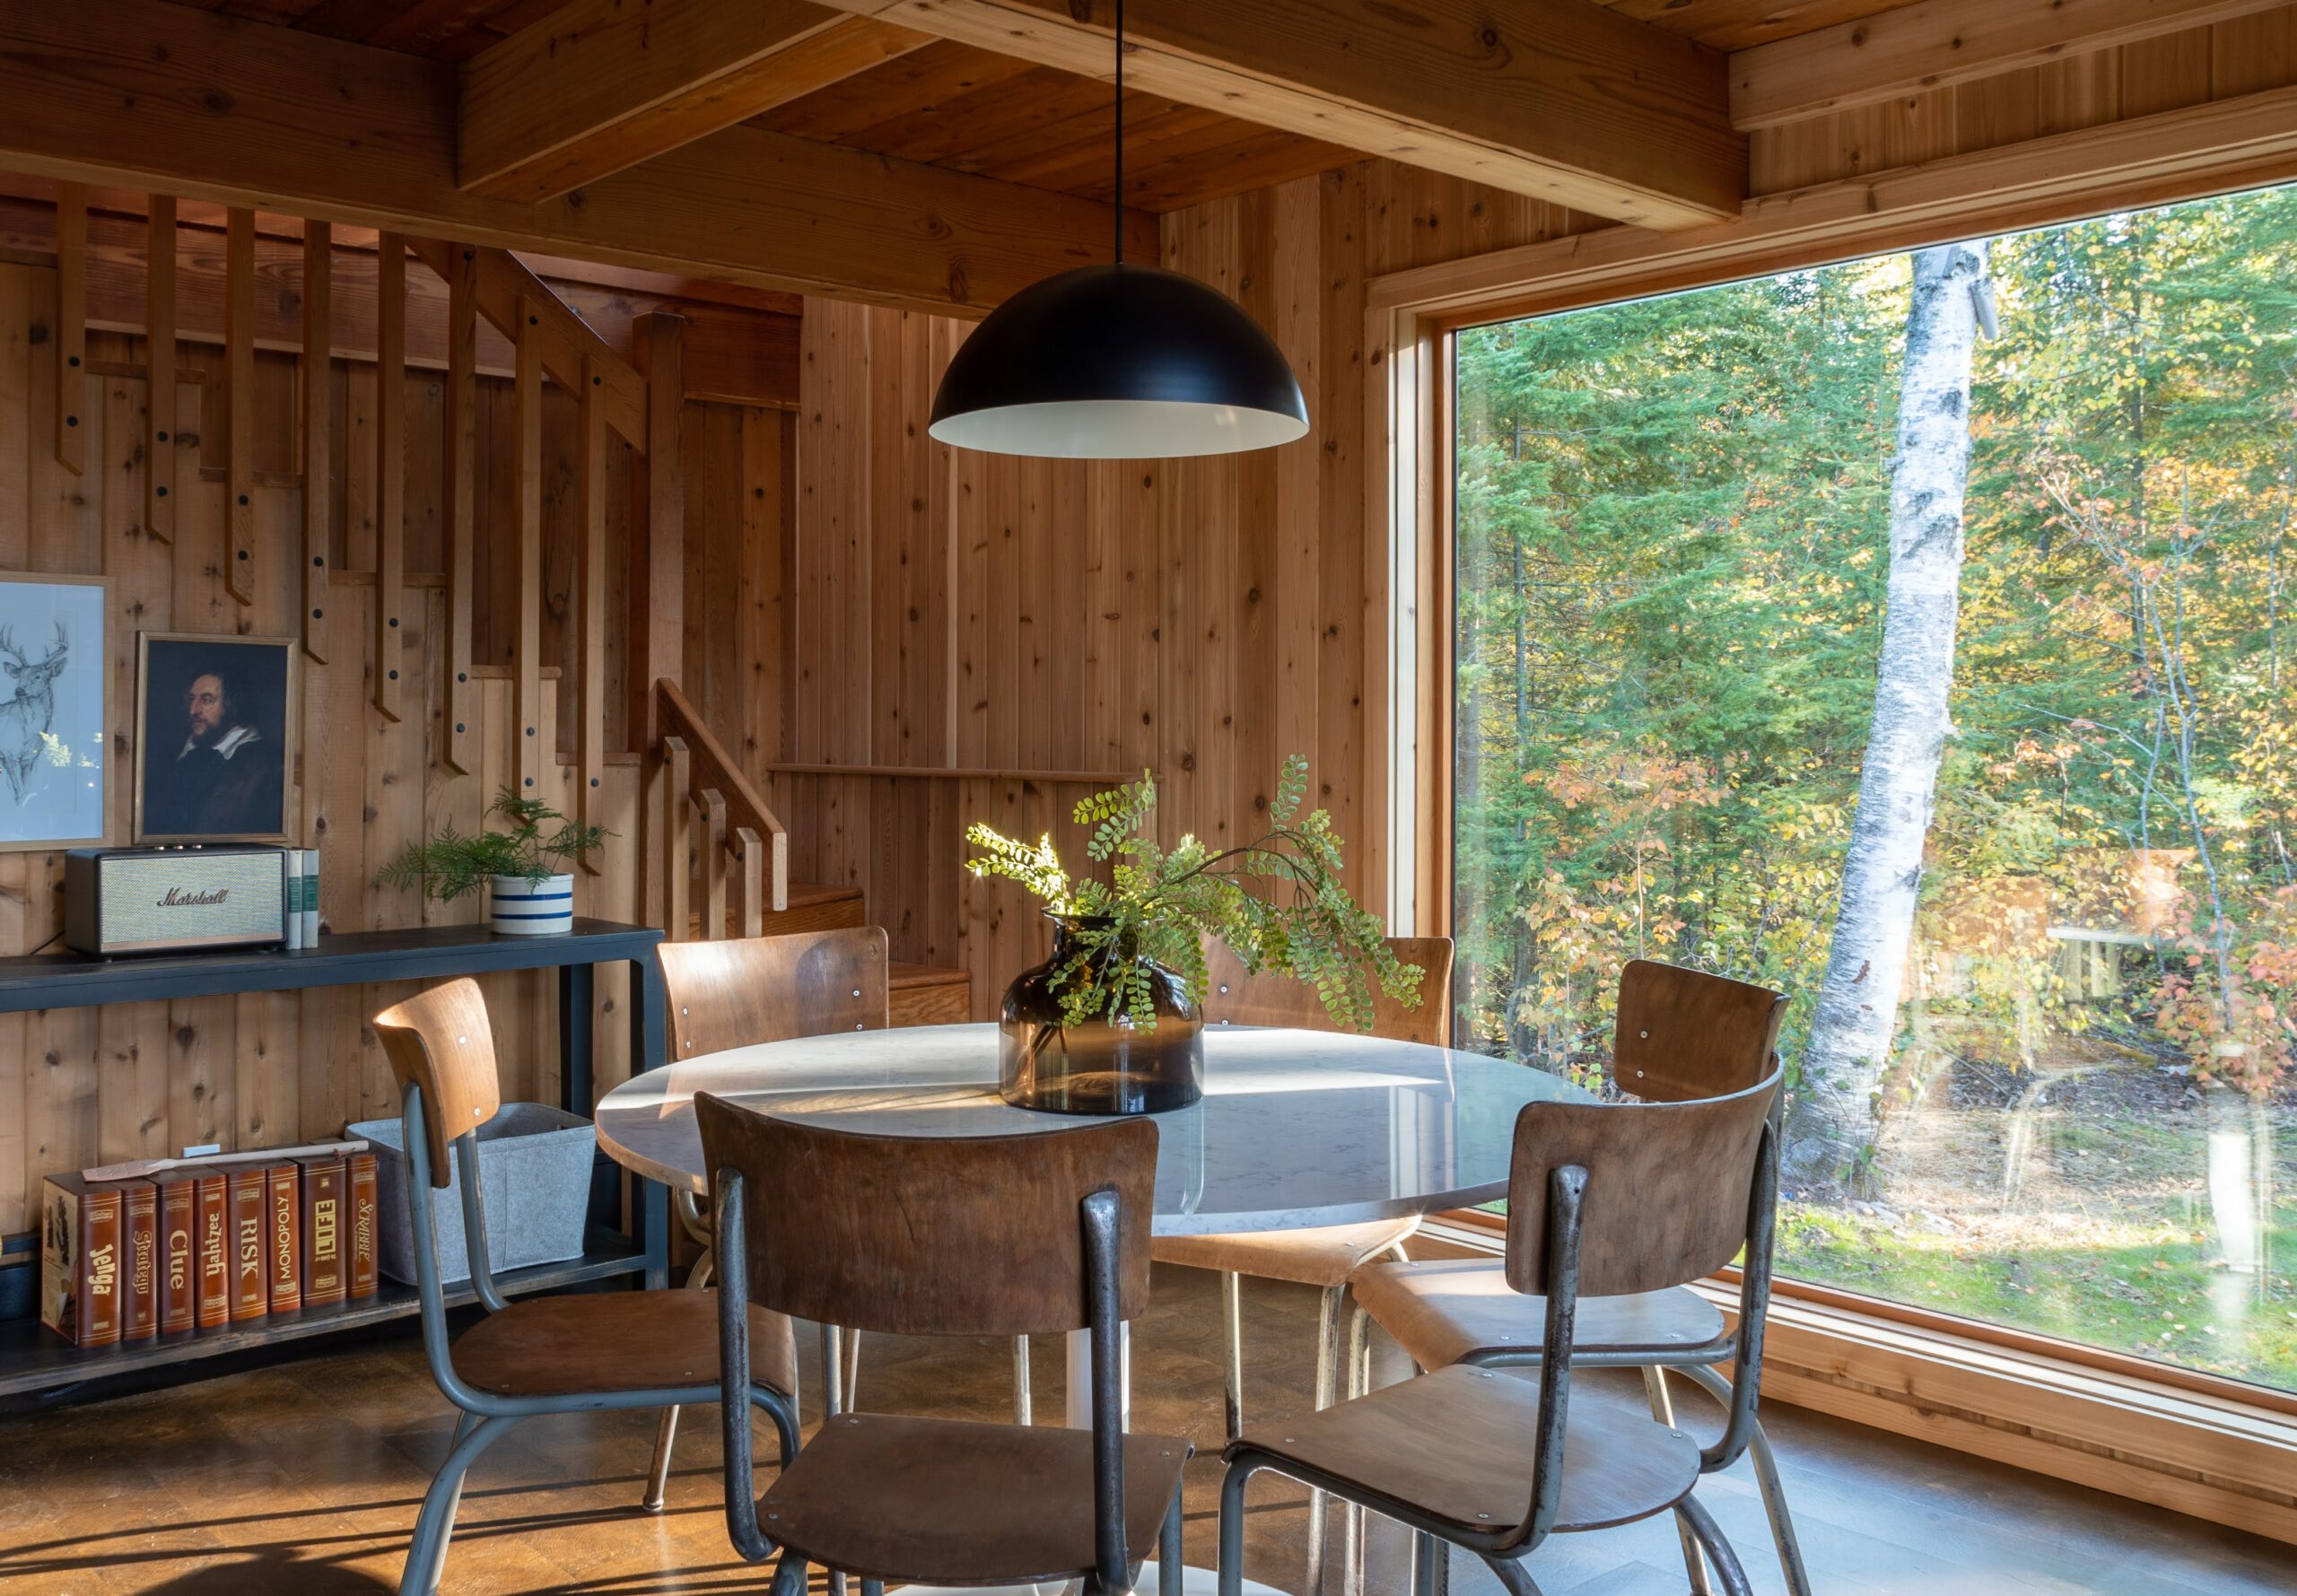 Interior view of a circular dining room table of The Minne Stuga Cabin in Grand Marais Minnesota prominently featuring Kebony modified wood siding throughout the houses' design with a giant floor to ceiling window showing the woods outside.